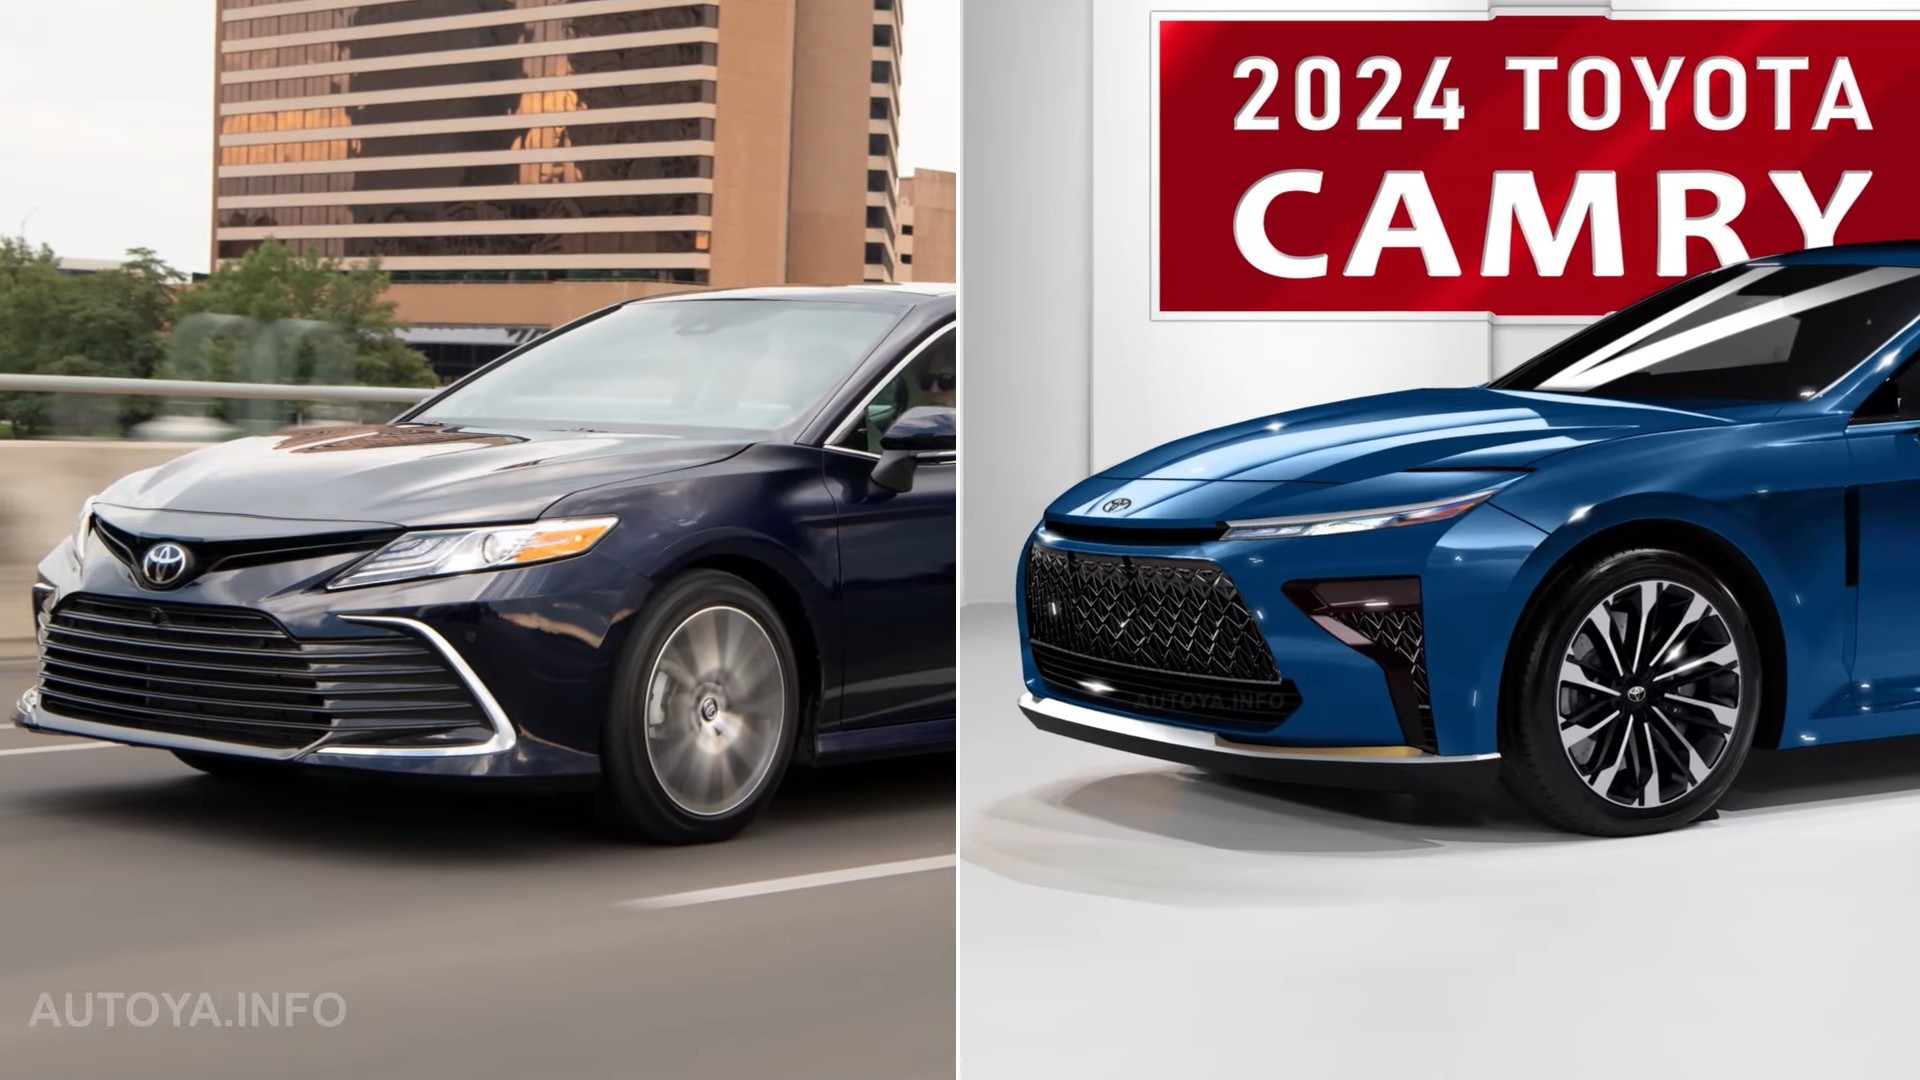 2024 Toyota Camry IX Informally Presents All the Colorful New